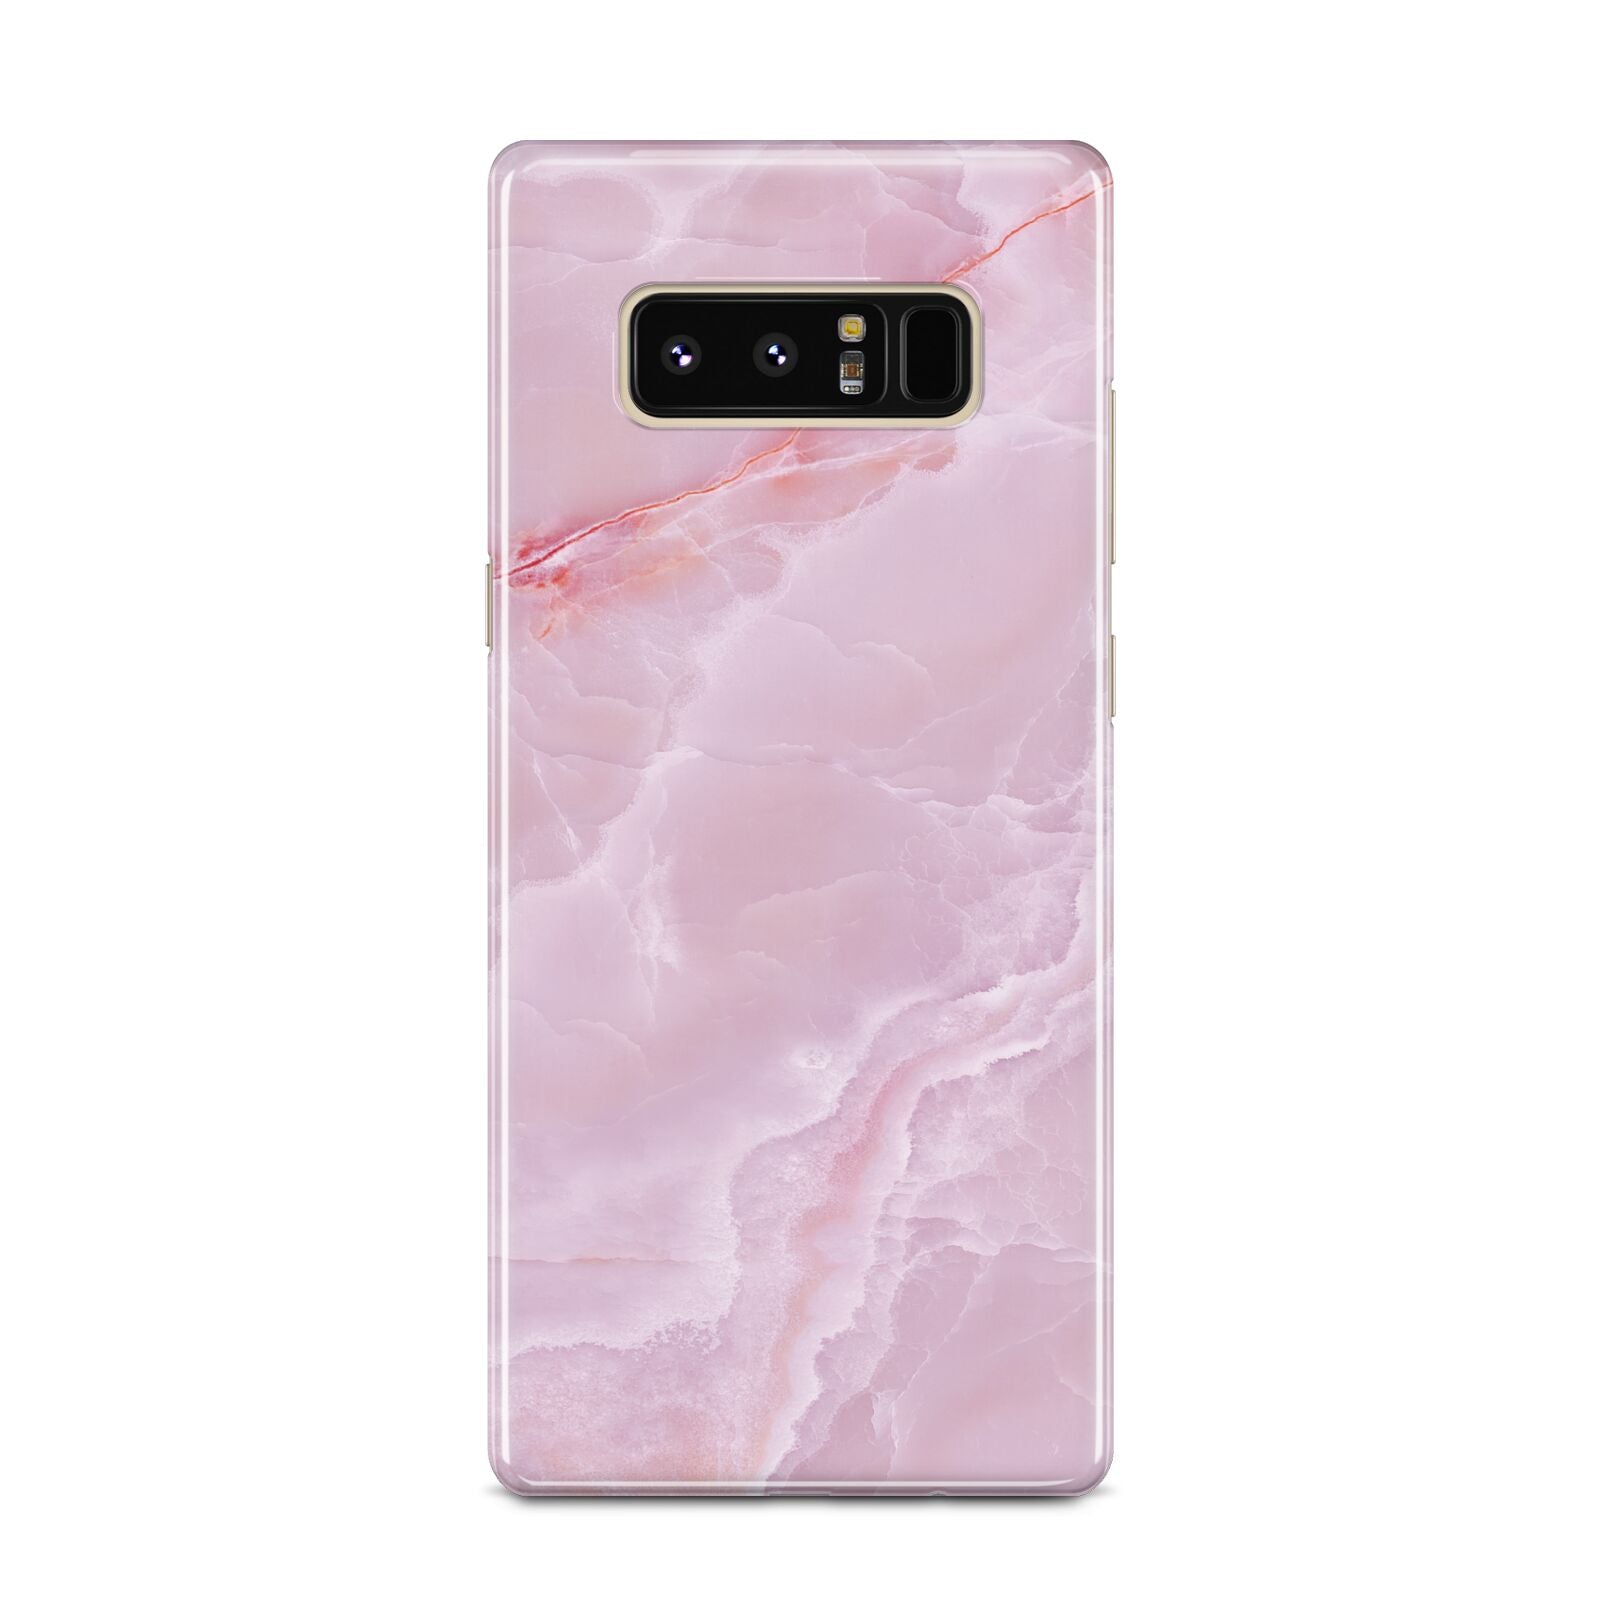 Dreamy Pink Marble Samsung Galaxy Note 8 Case